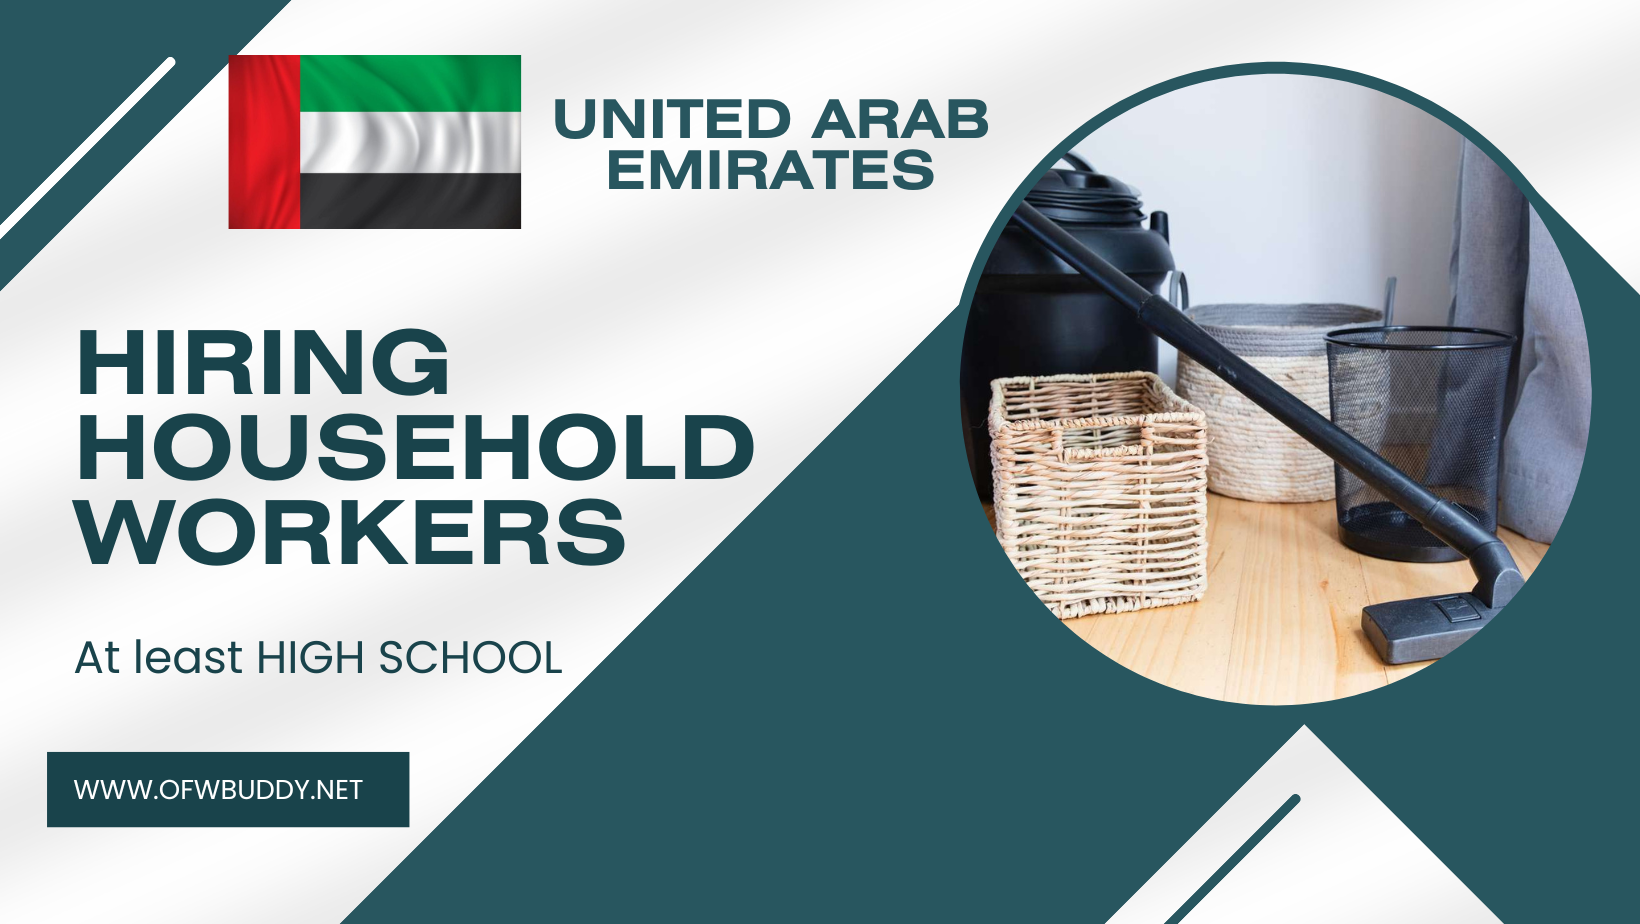 Hiring Household Worker For United Arab Emirates Under Lrc Manpower Services Internationale Inc